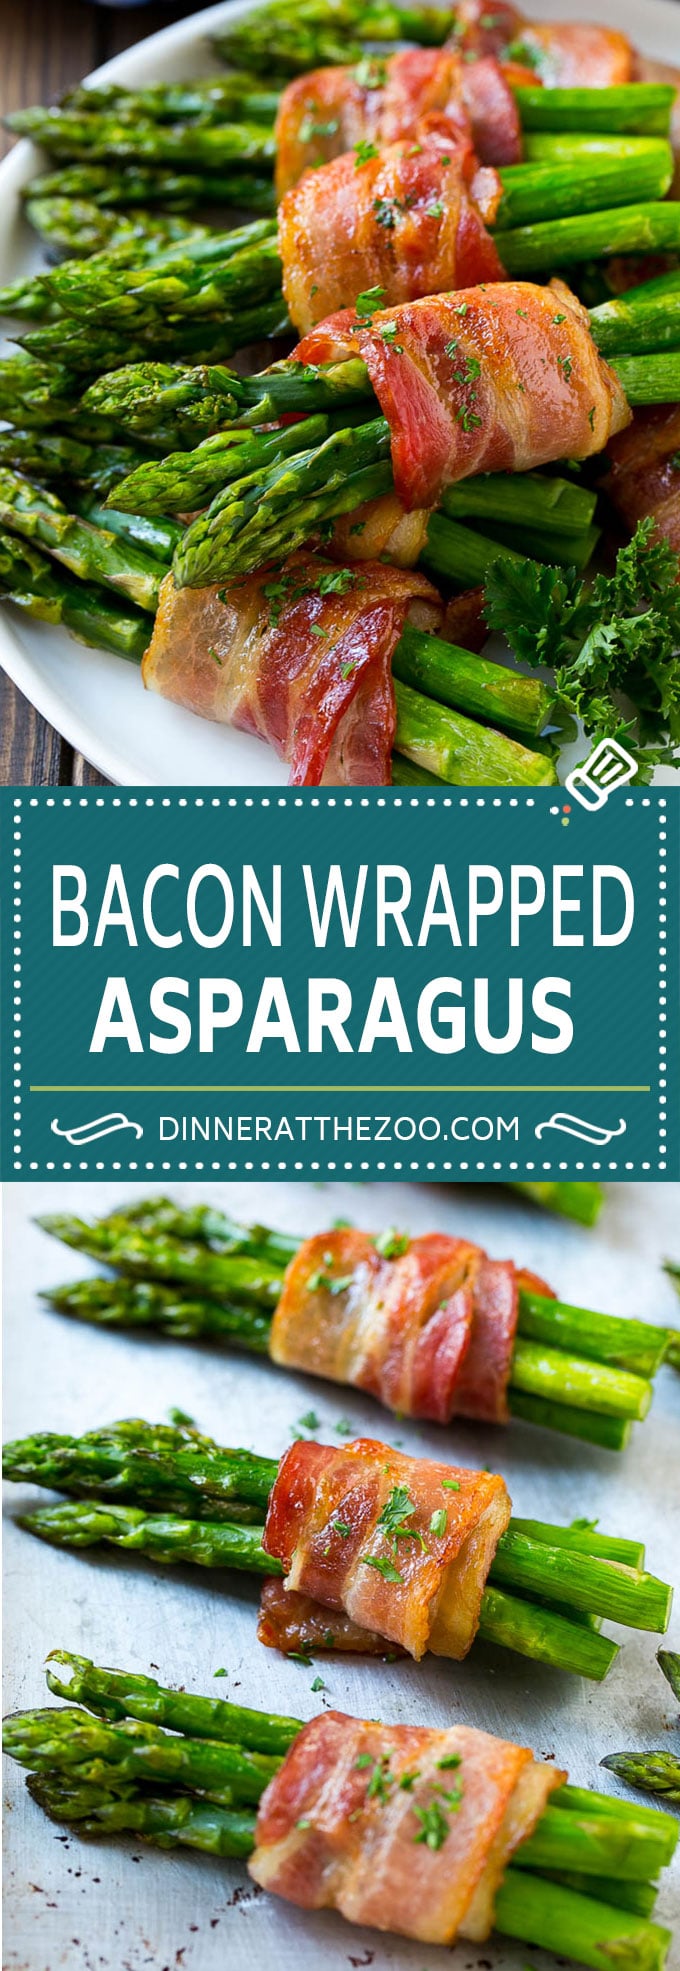 Bacon Wrapped Asparagus Recipe | Roasted Asparagus | Asparagus Side Dish #asparagus #bacon #sidedish #dinner #dinneratthezoo